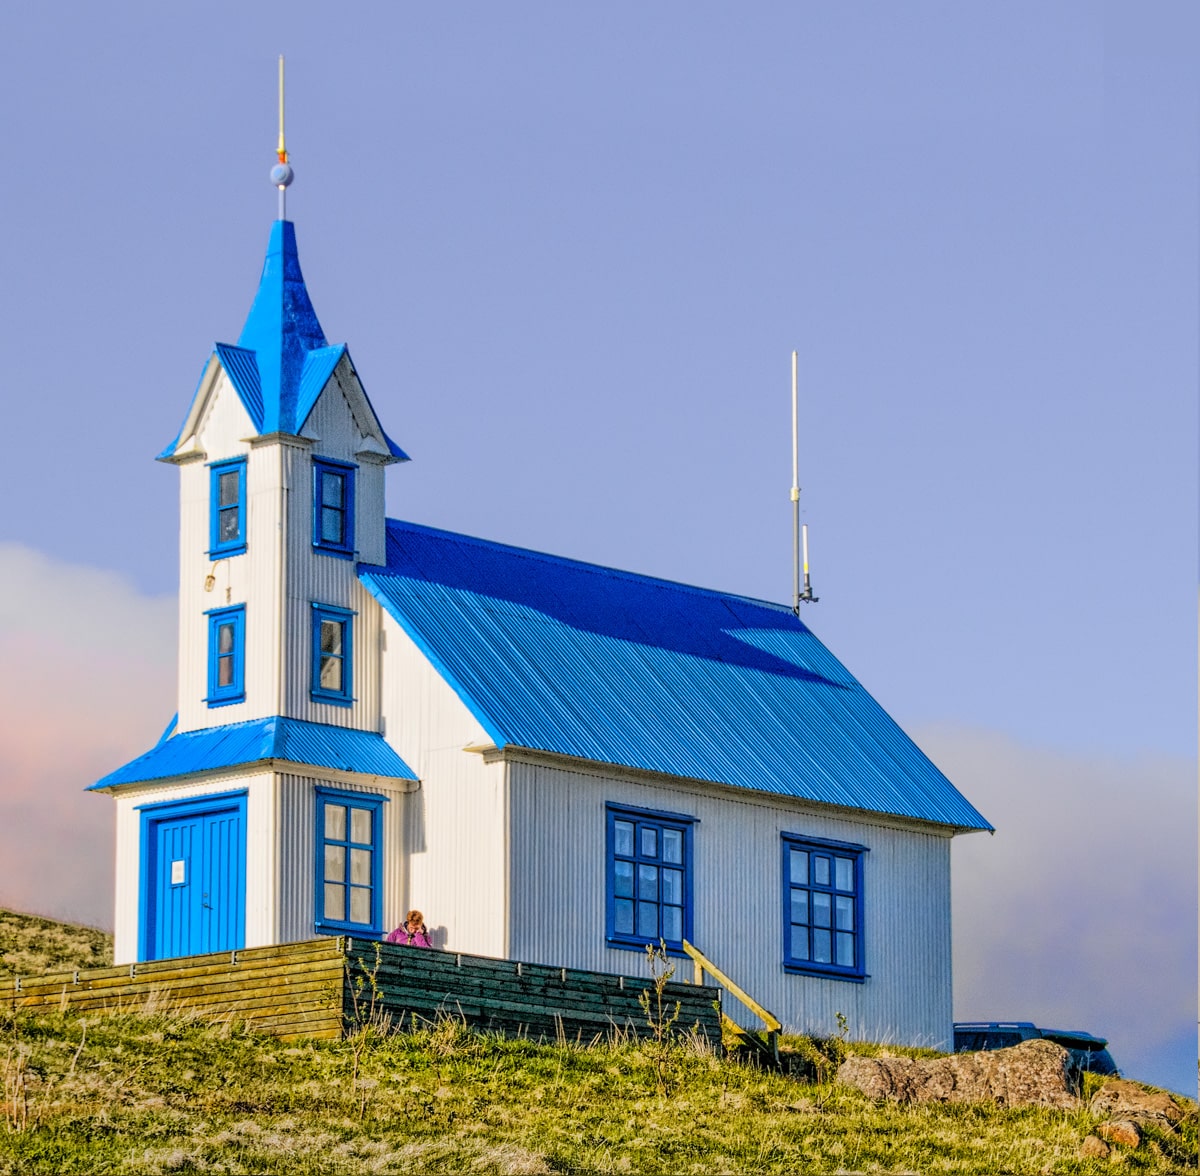 Now for something a little different. Kirkjubær, in Stöðvarfjörður, is a deconsecrated church that has been transformed into a guesthouse.This was the first of several church buildings we encountered with a blue and white color scheme.